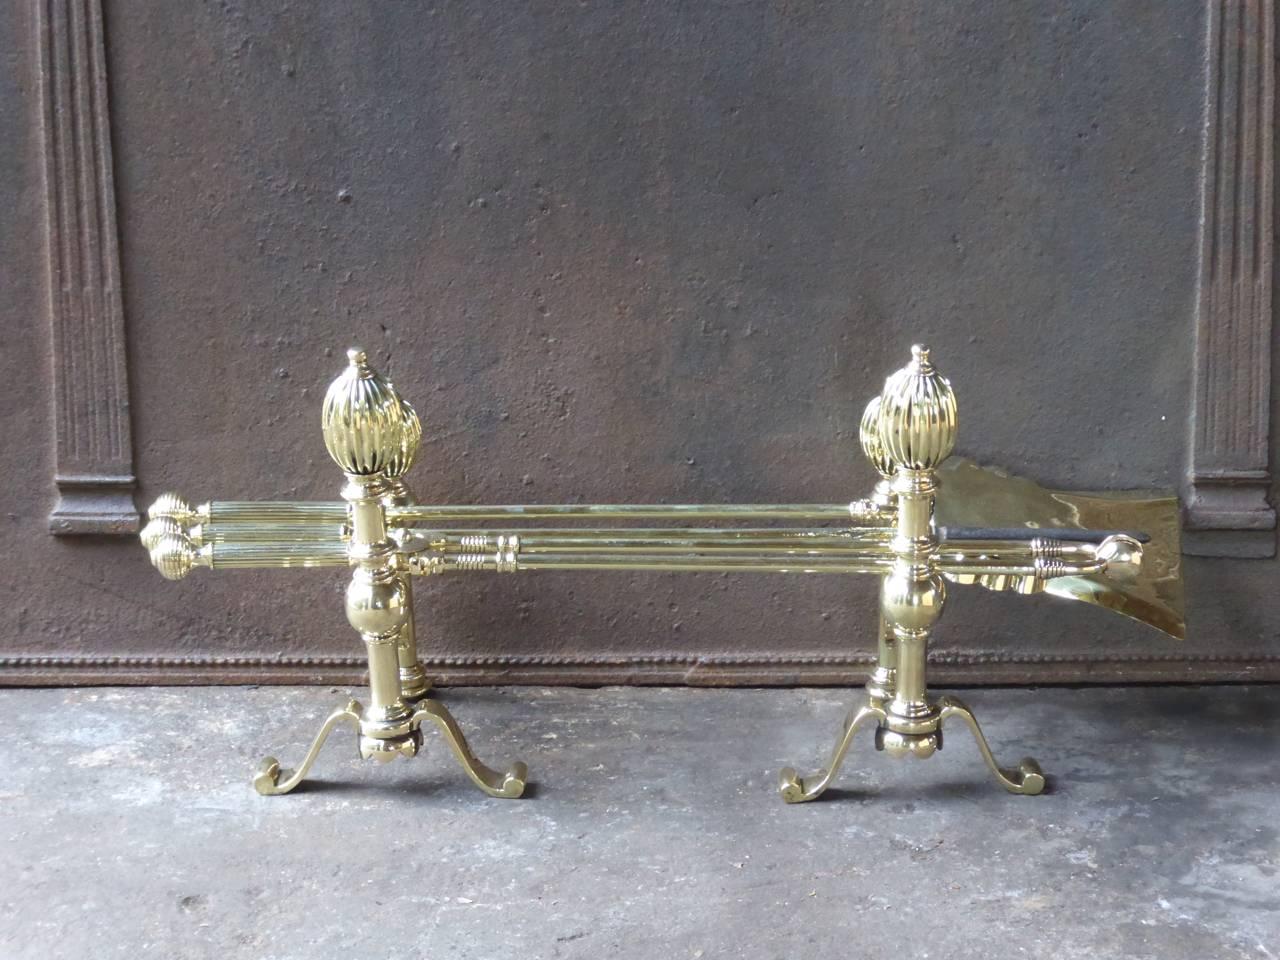 English fireplace tool set, fire irons made of polished brass.

We have a unique and specialized collection of antique and used fireplace accessories consisting of more than 1000 listings at 1stdibs. Amongst others, we always have 300+ firebacks,